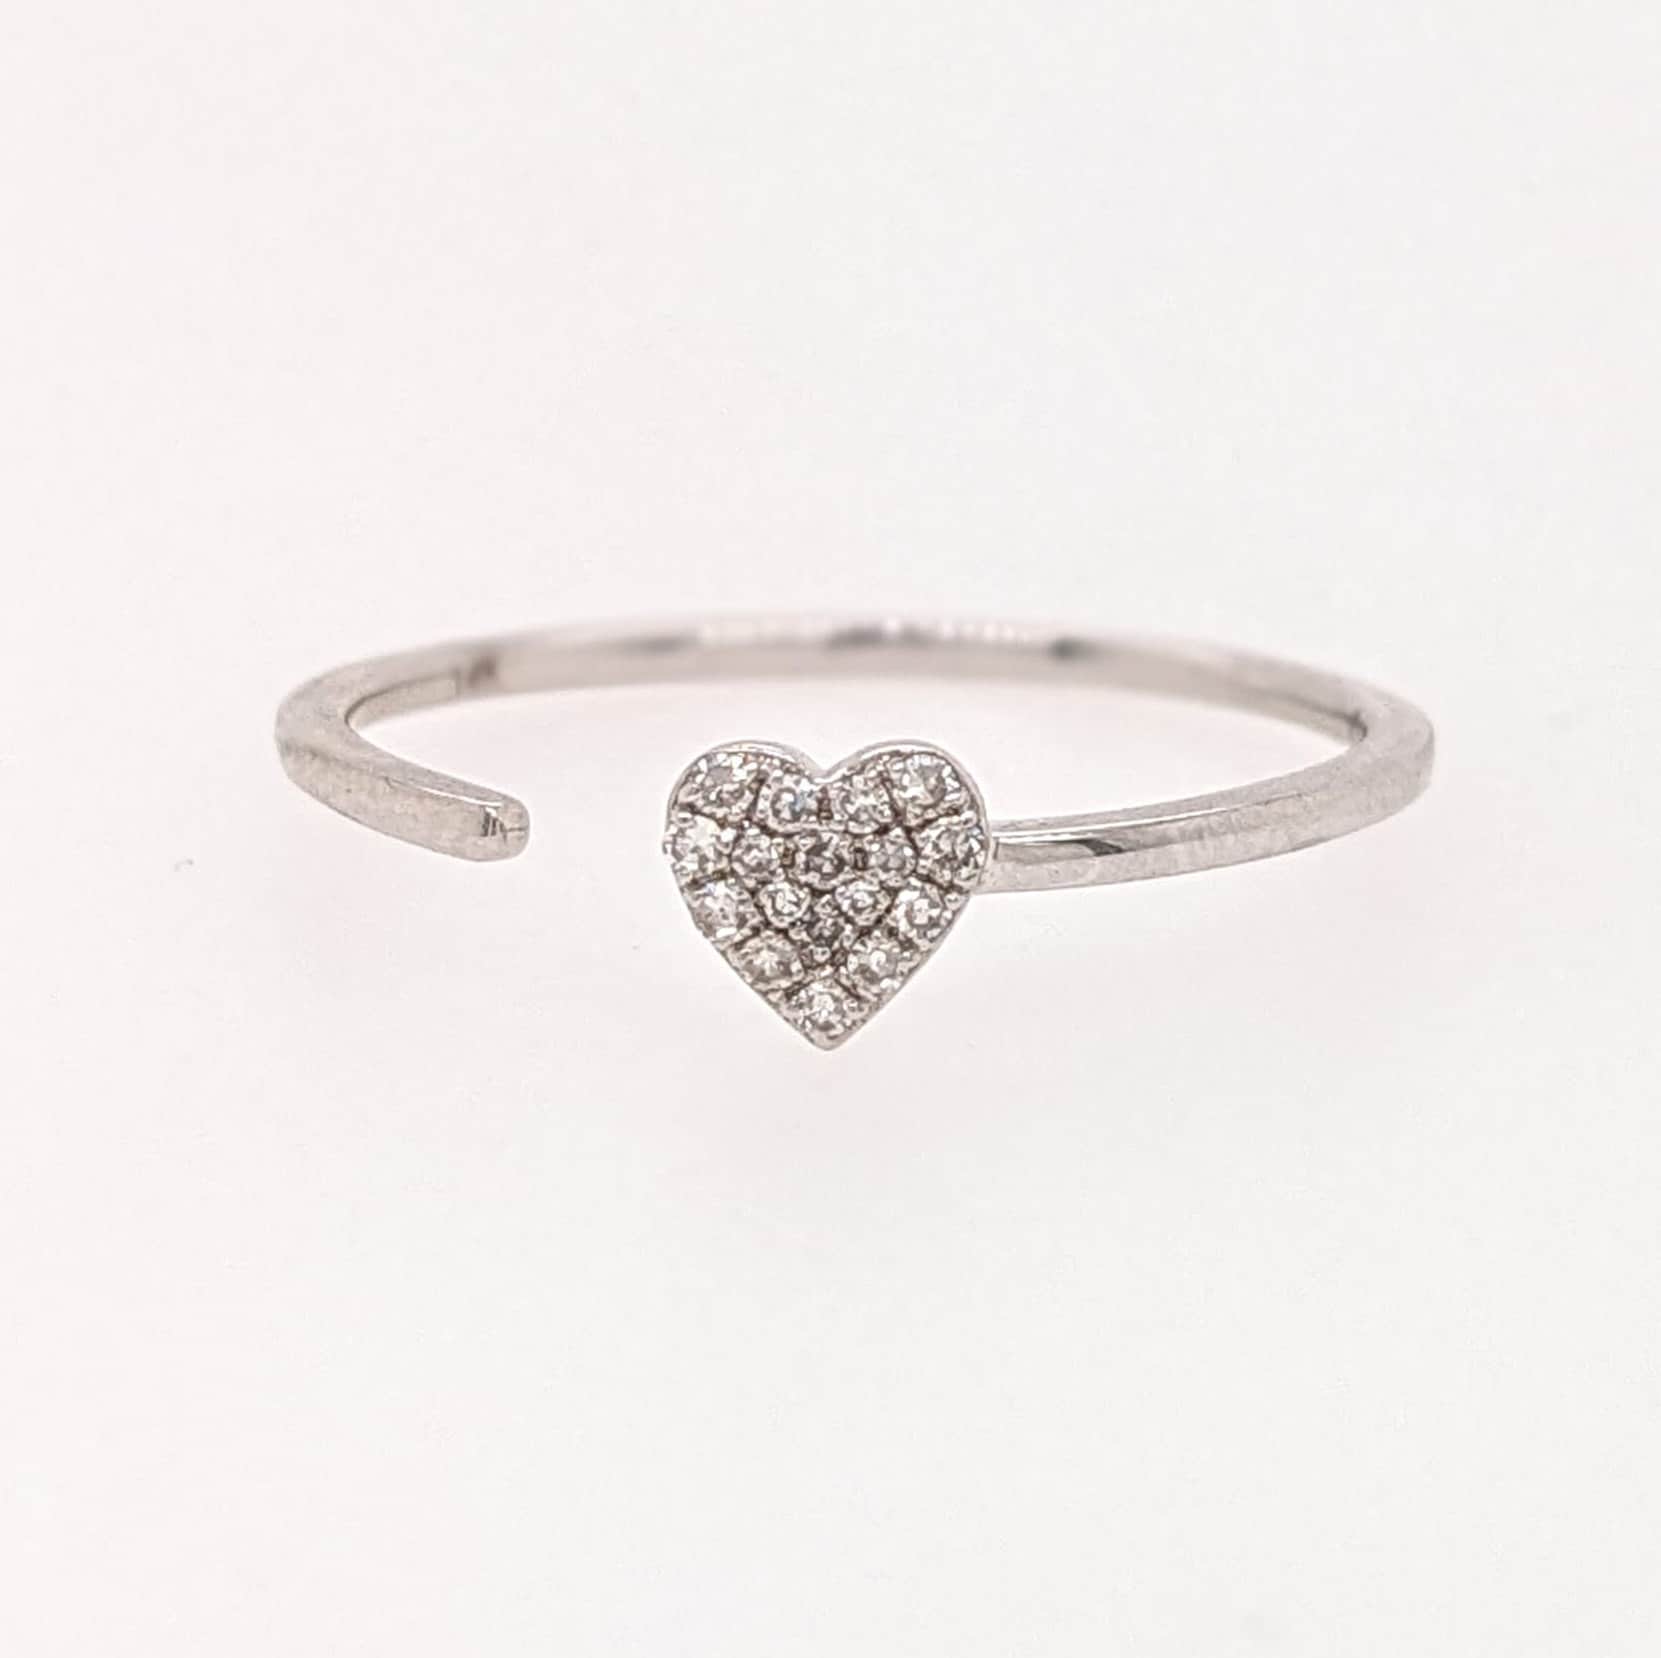 Stackable Rings-Cute Open Heart Band w Natural Diamond Accents in Solid 14k White Gold || Round Diamonds || Natural Diamonds || Stackable || Minimalistic || - NNJGemstones